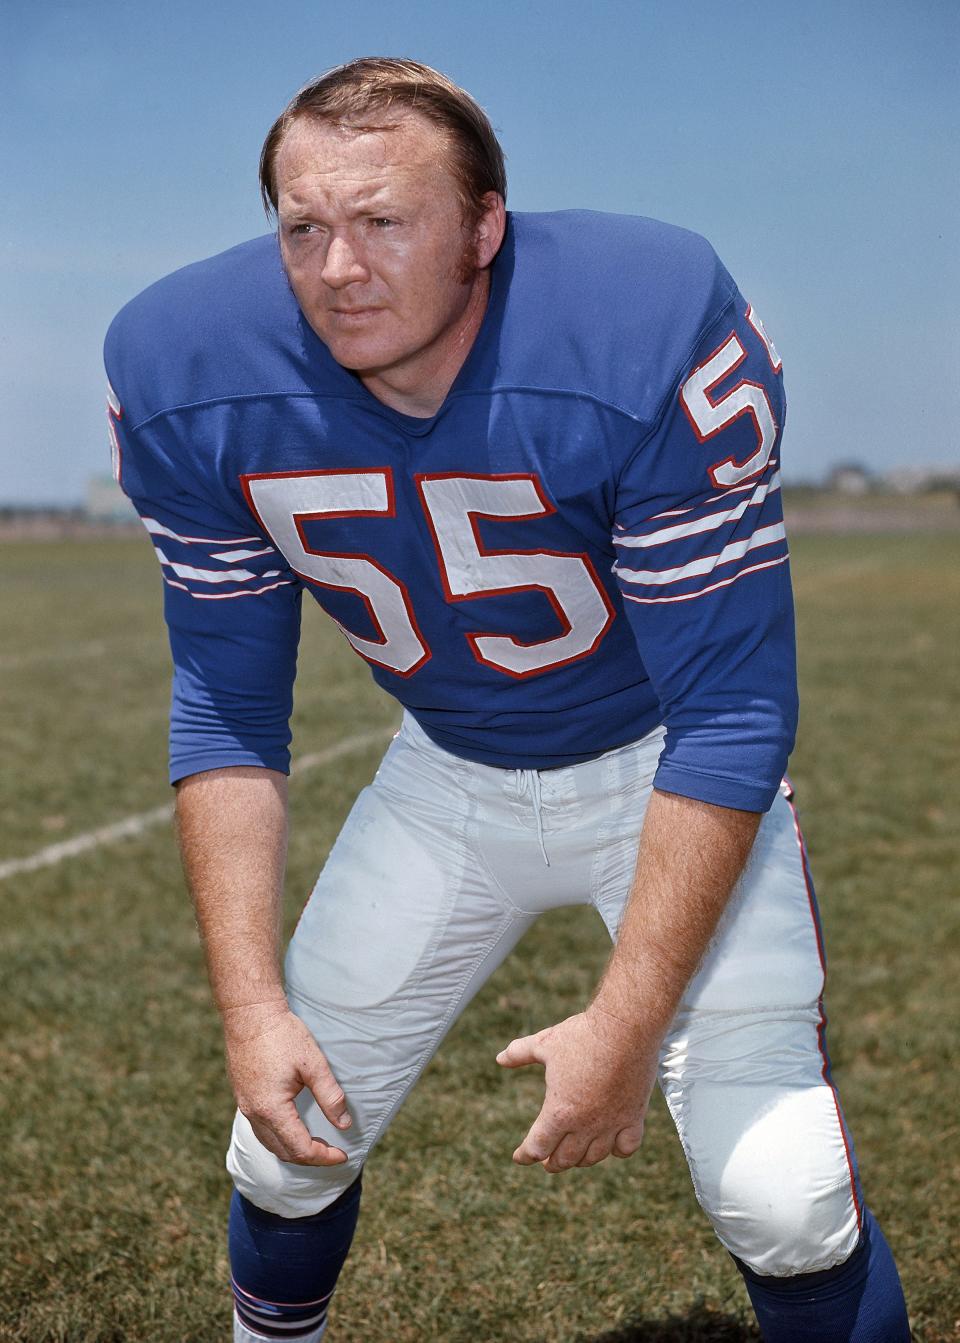 Paul Maguire played seven seasons in Buffalo as a punter and linebacker before retiring in 1970.